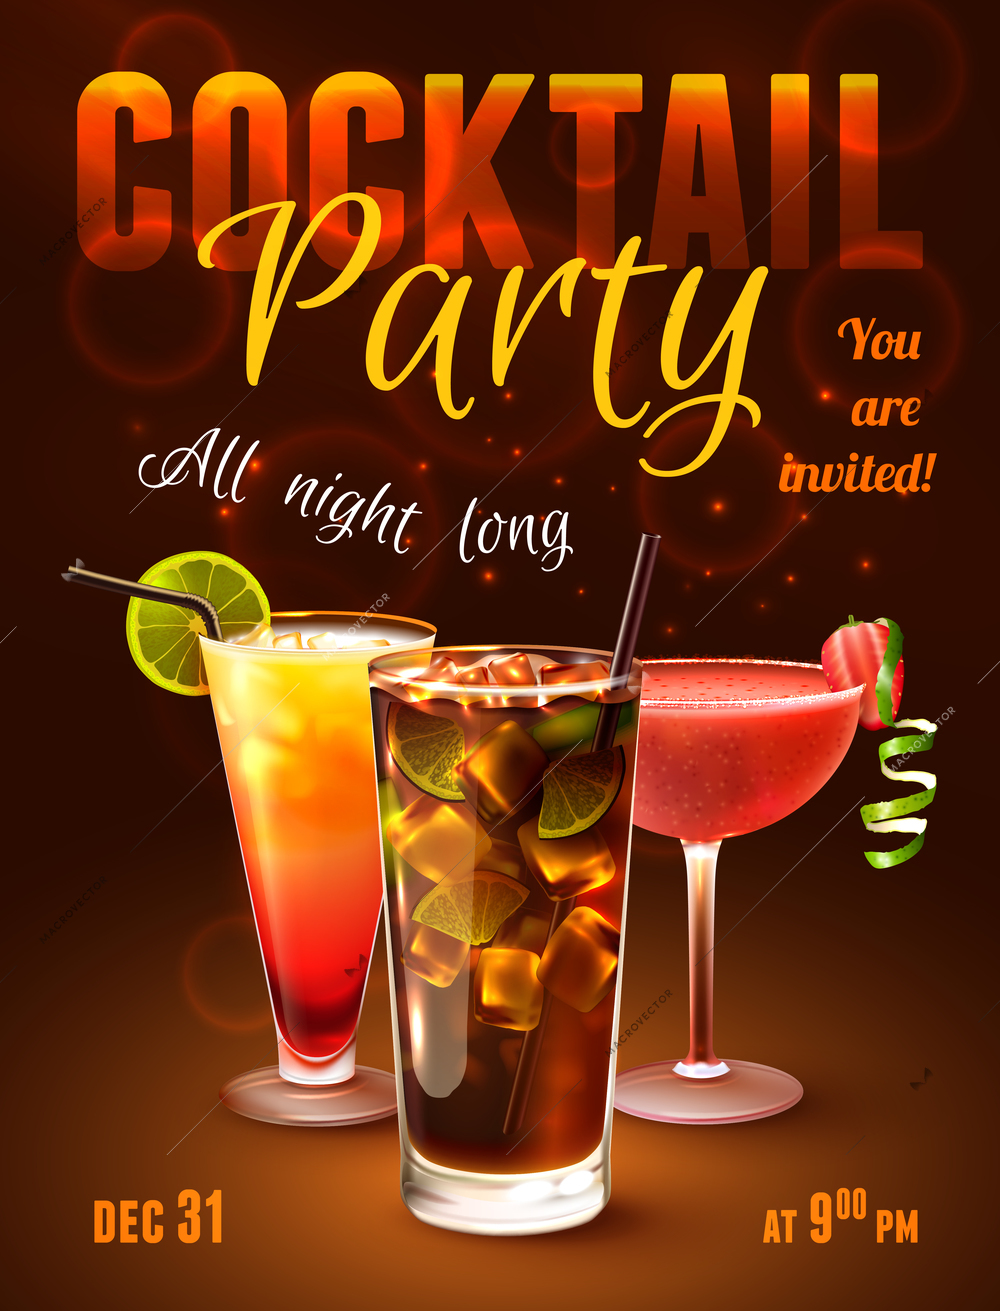 Cocktail party poster with alcohol drinks in glasses on dark background vector illustration.